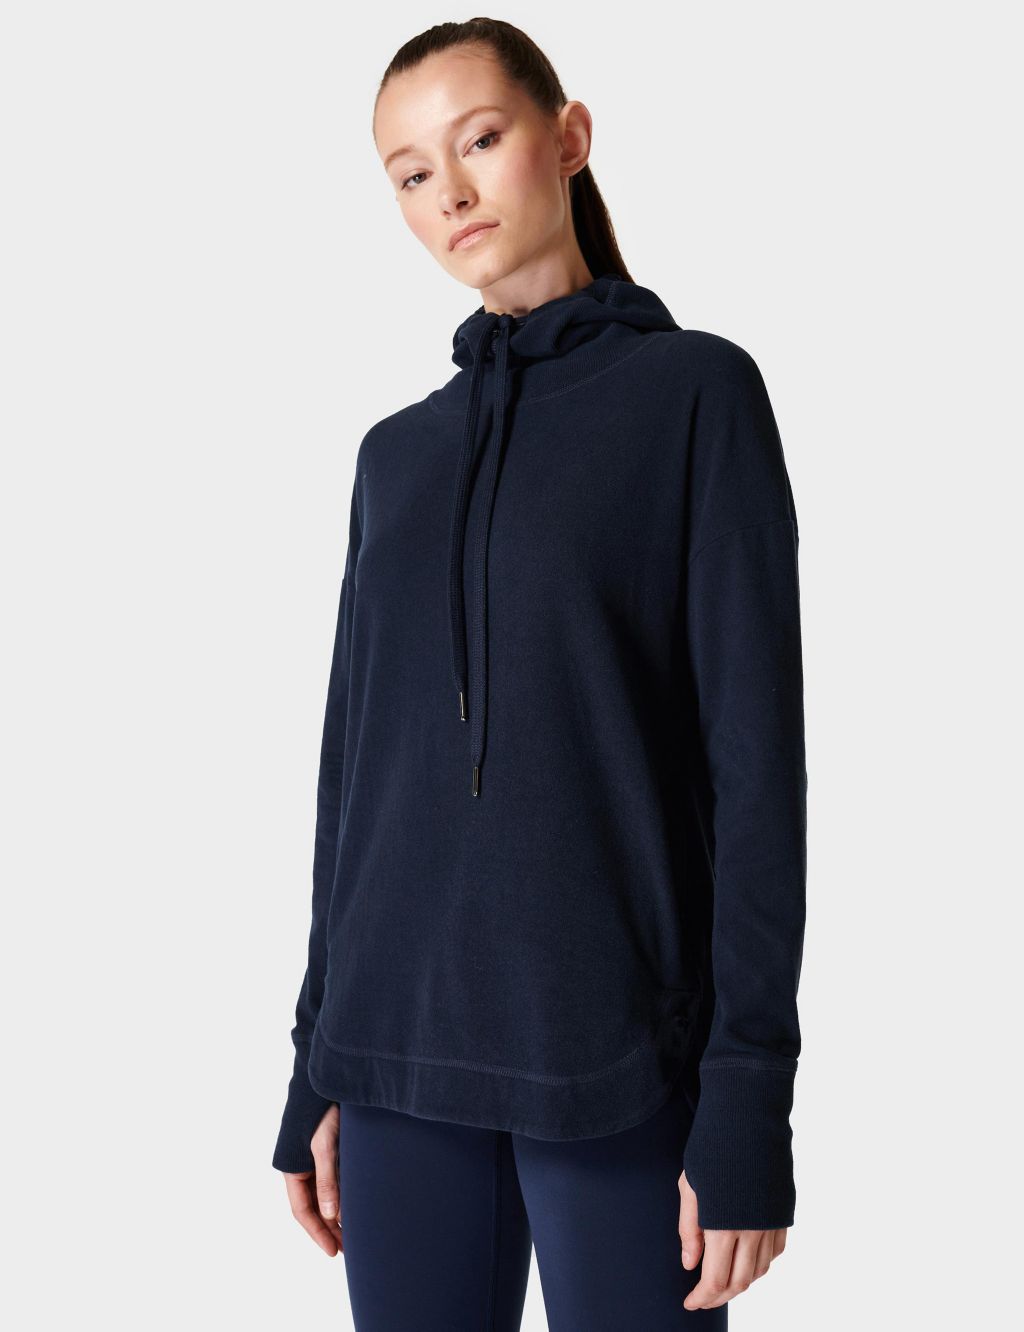 Escape Cotton Blend Fleece Relaxed Hoodie image 1